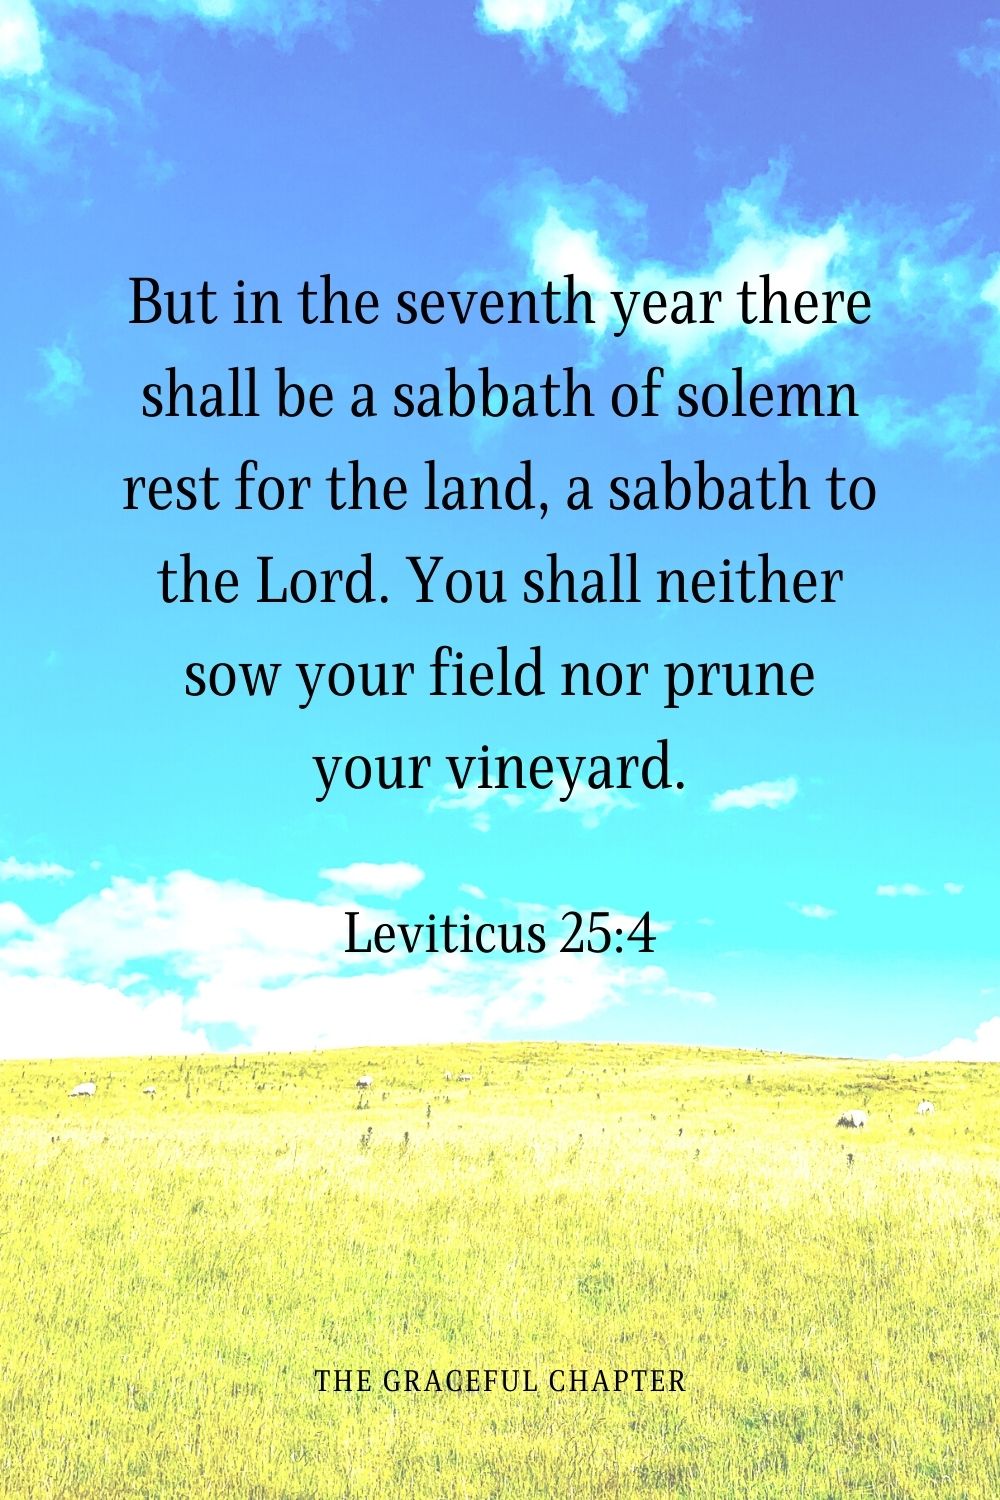 But in the seventh year there shall be a sabbath of solemn rest for the land, a sabbath to the Lord. You shall neither sow your field nor prune your vineyard.